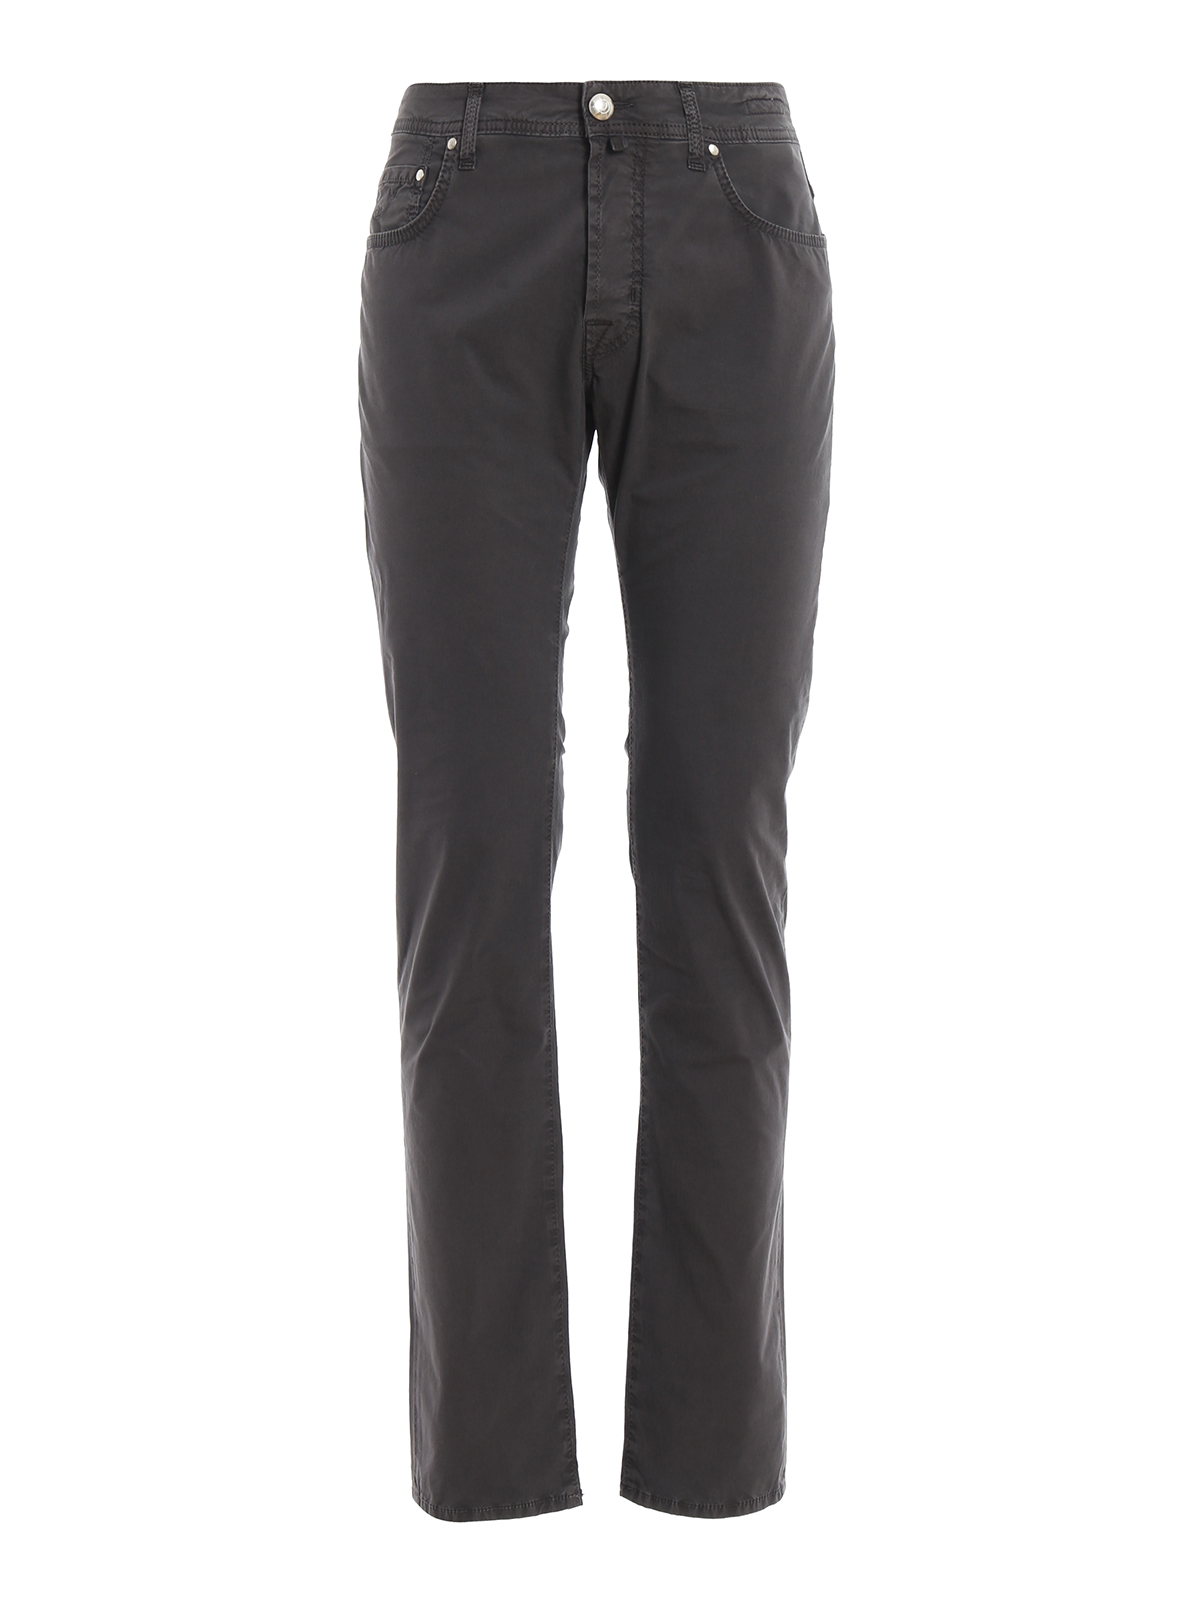 Casual trousers Jacob Cohen - Style 688 dark grey stretch cotton 